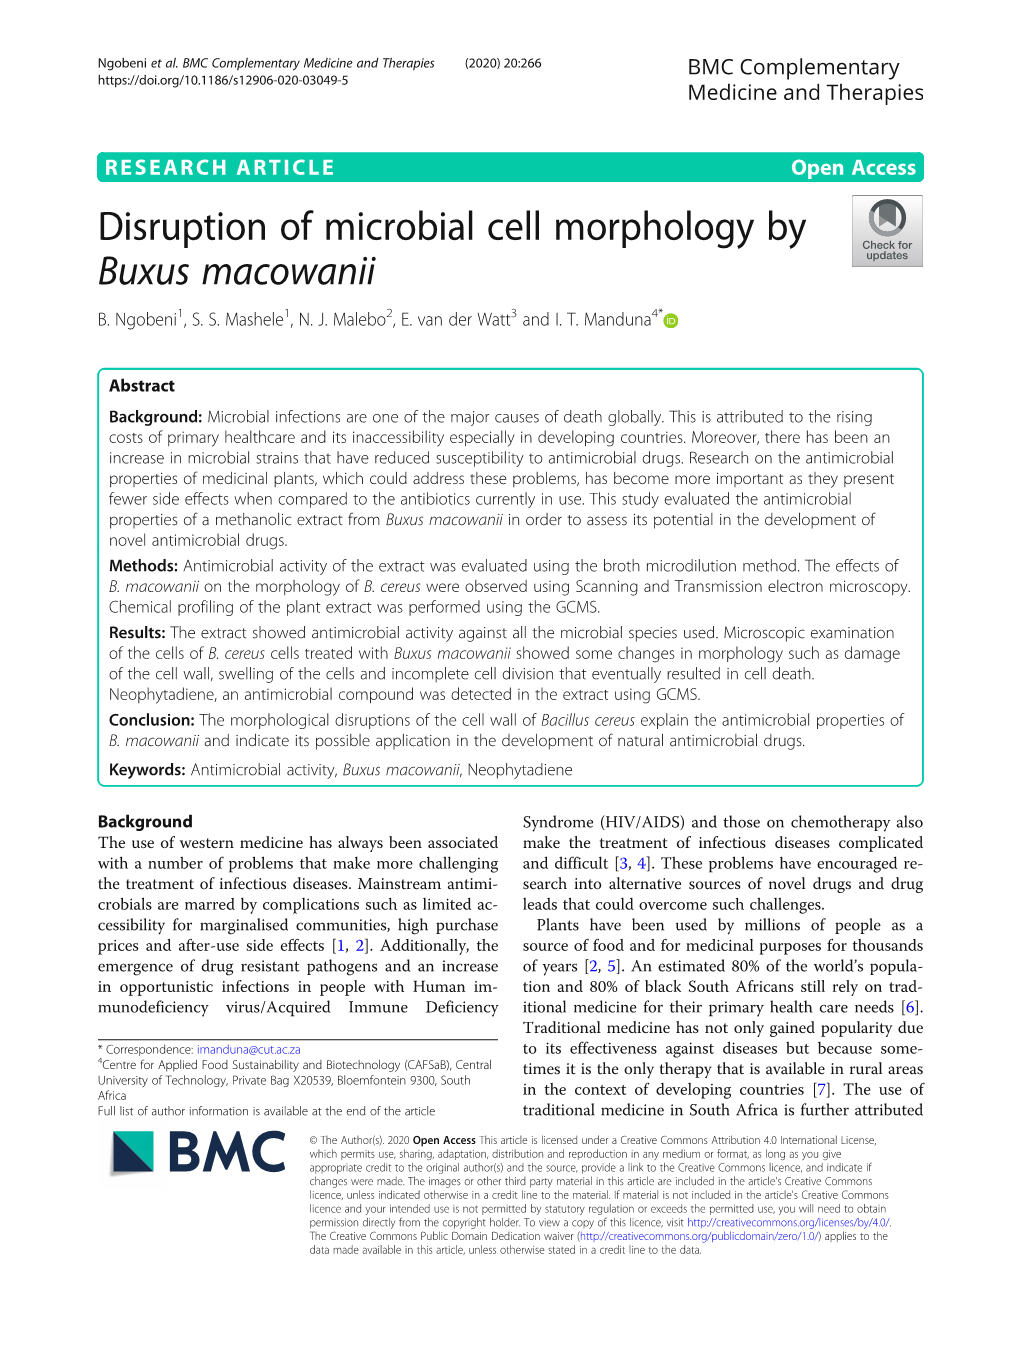 Disruption of Microbial Cell Morphology by Buxus Macowanii